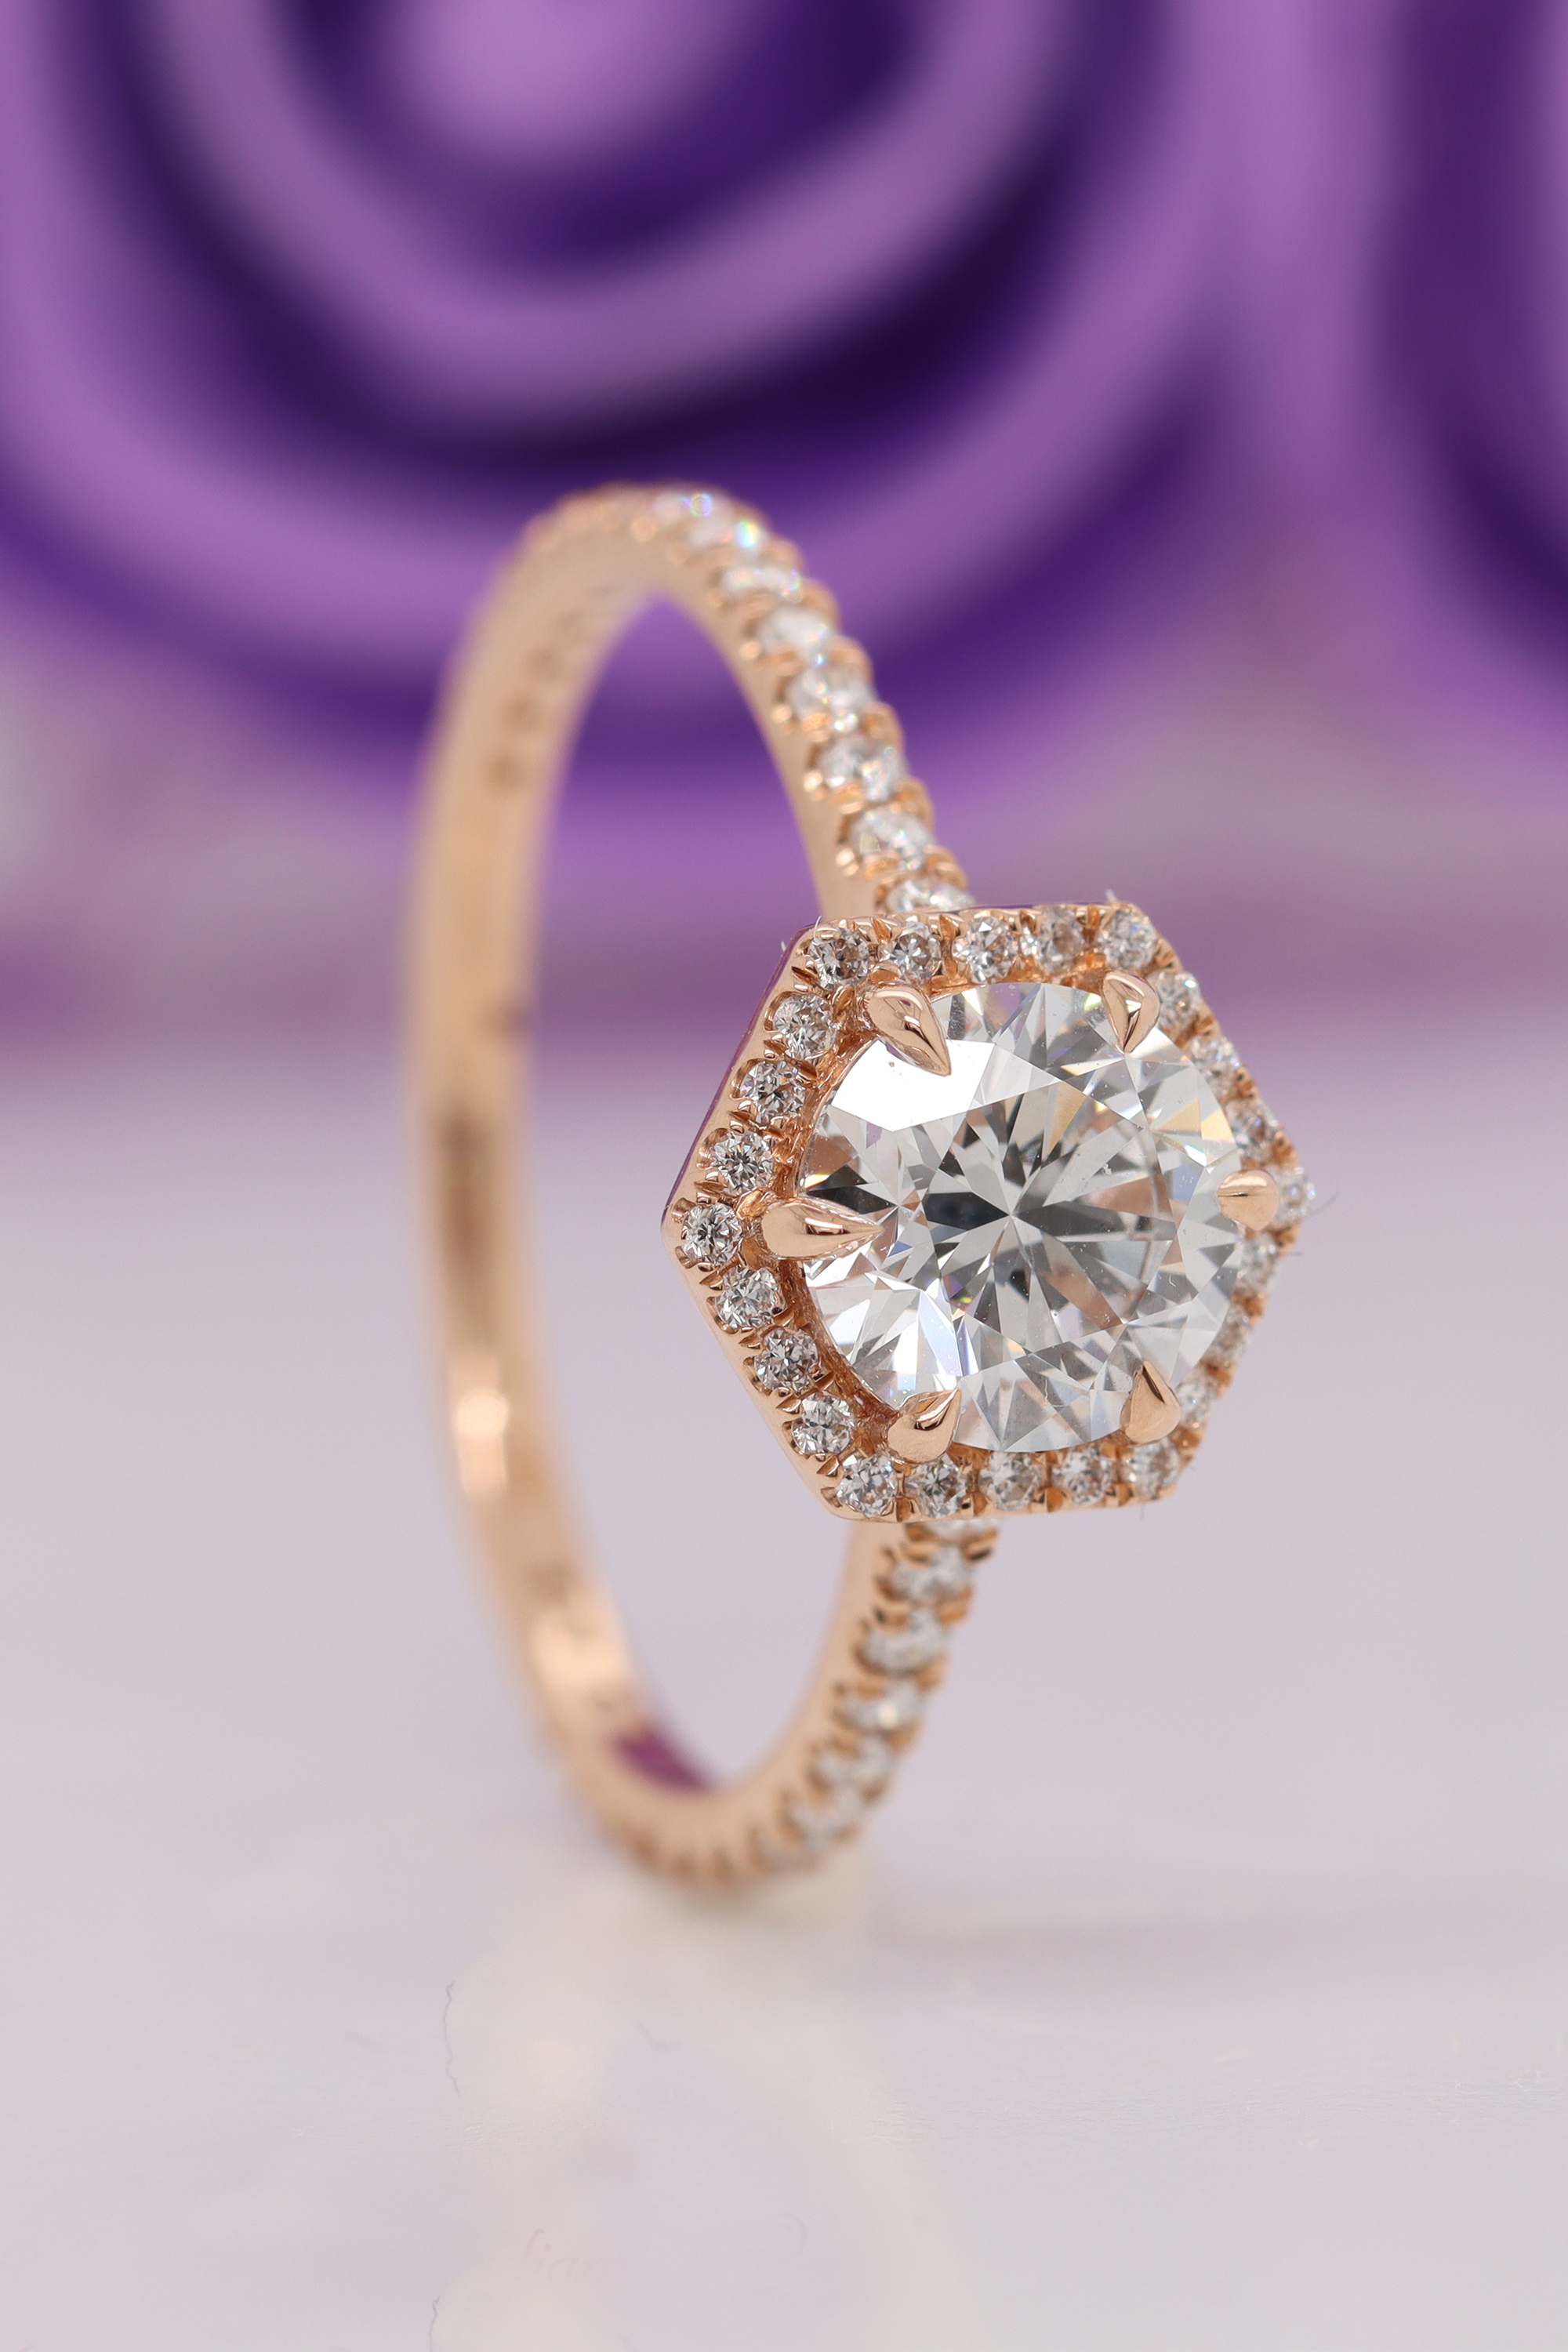 Up Close + Personal with Engagement Rings by Fascinating Diamonds